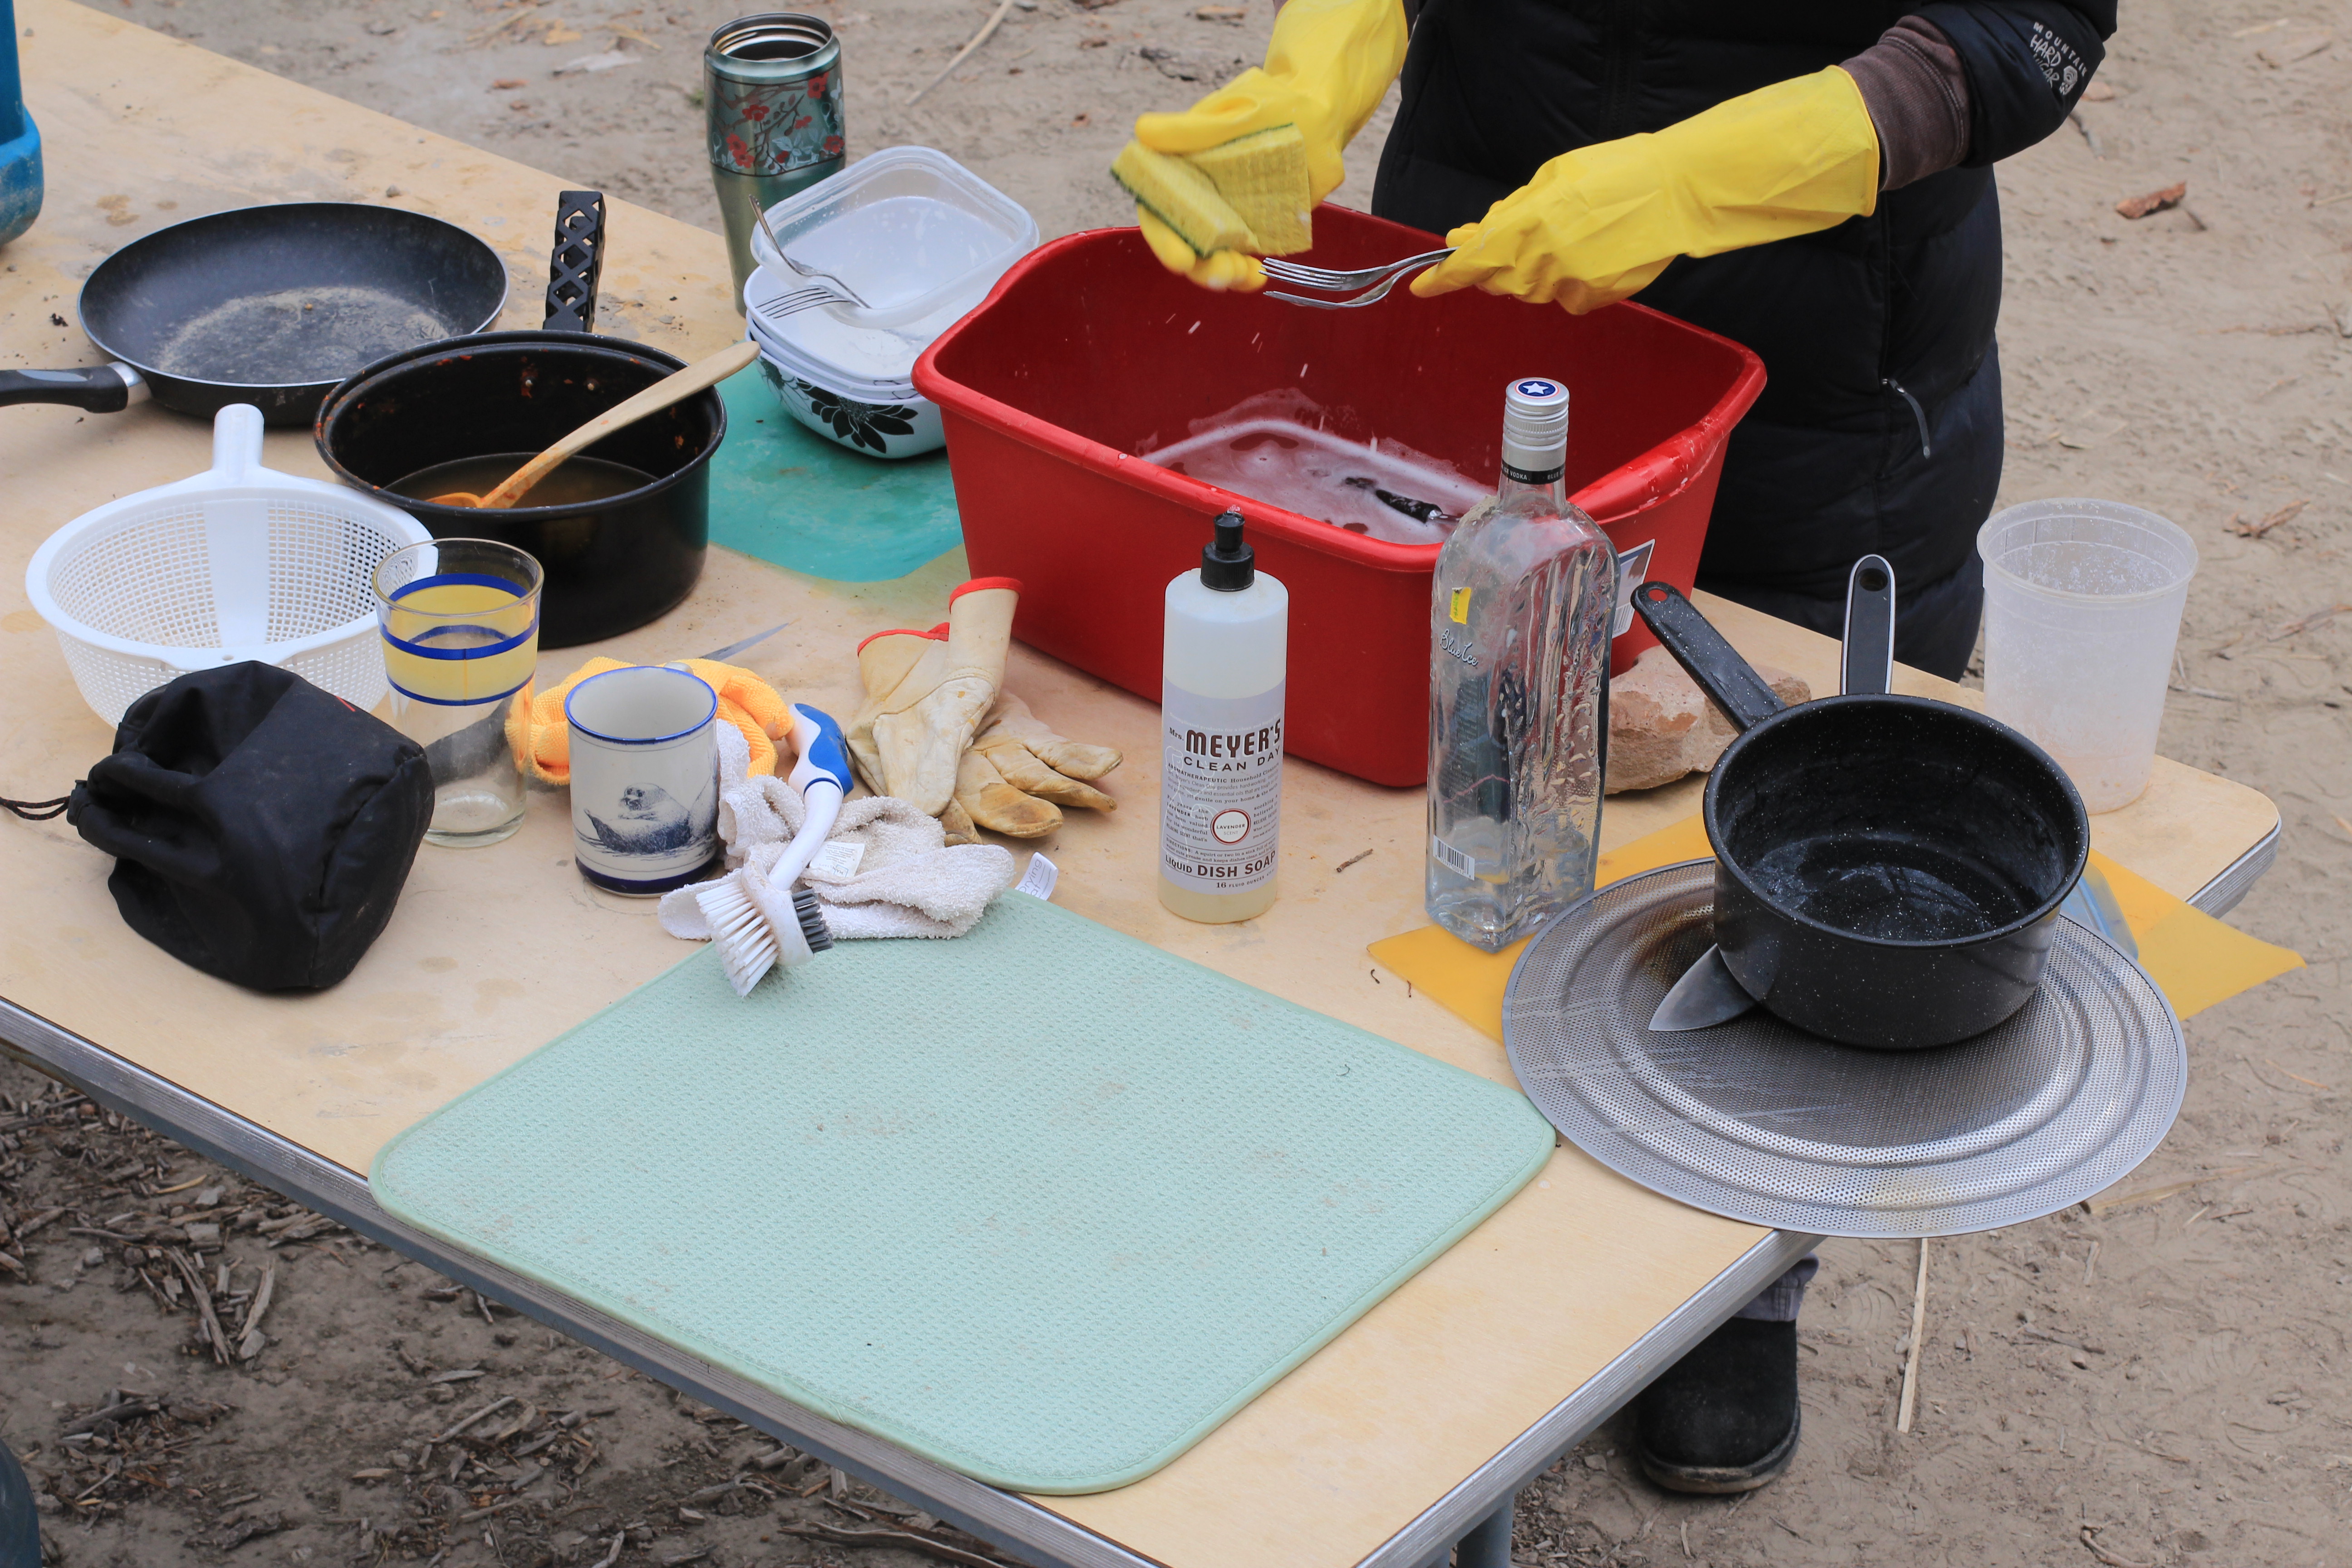 Washing dishes outdoors can be a pain in the arse, but you just need to find your groove. Our method: gloves (to protect our soft climbing hands) and a red bin.